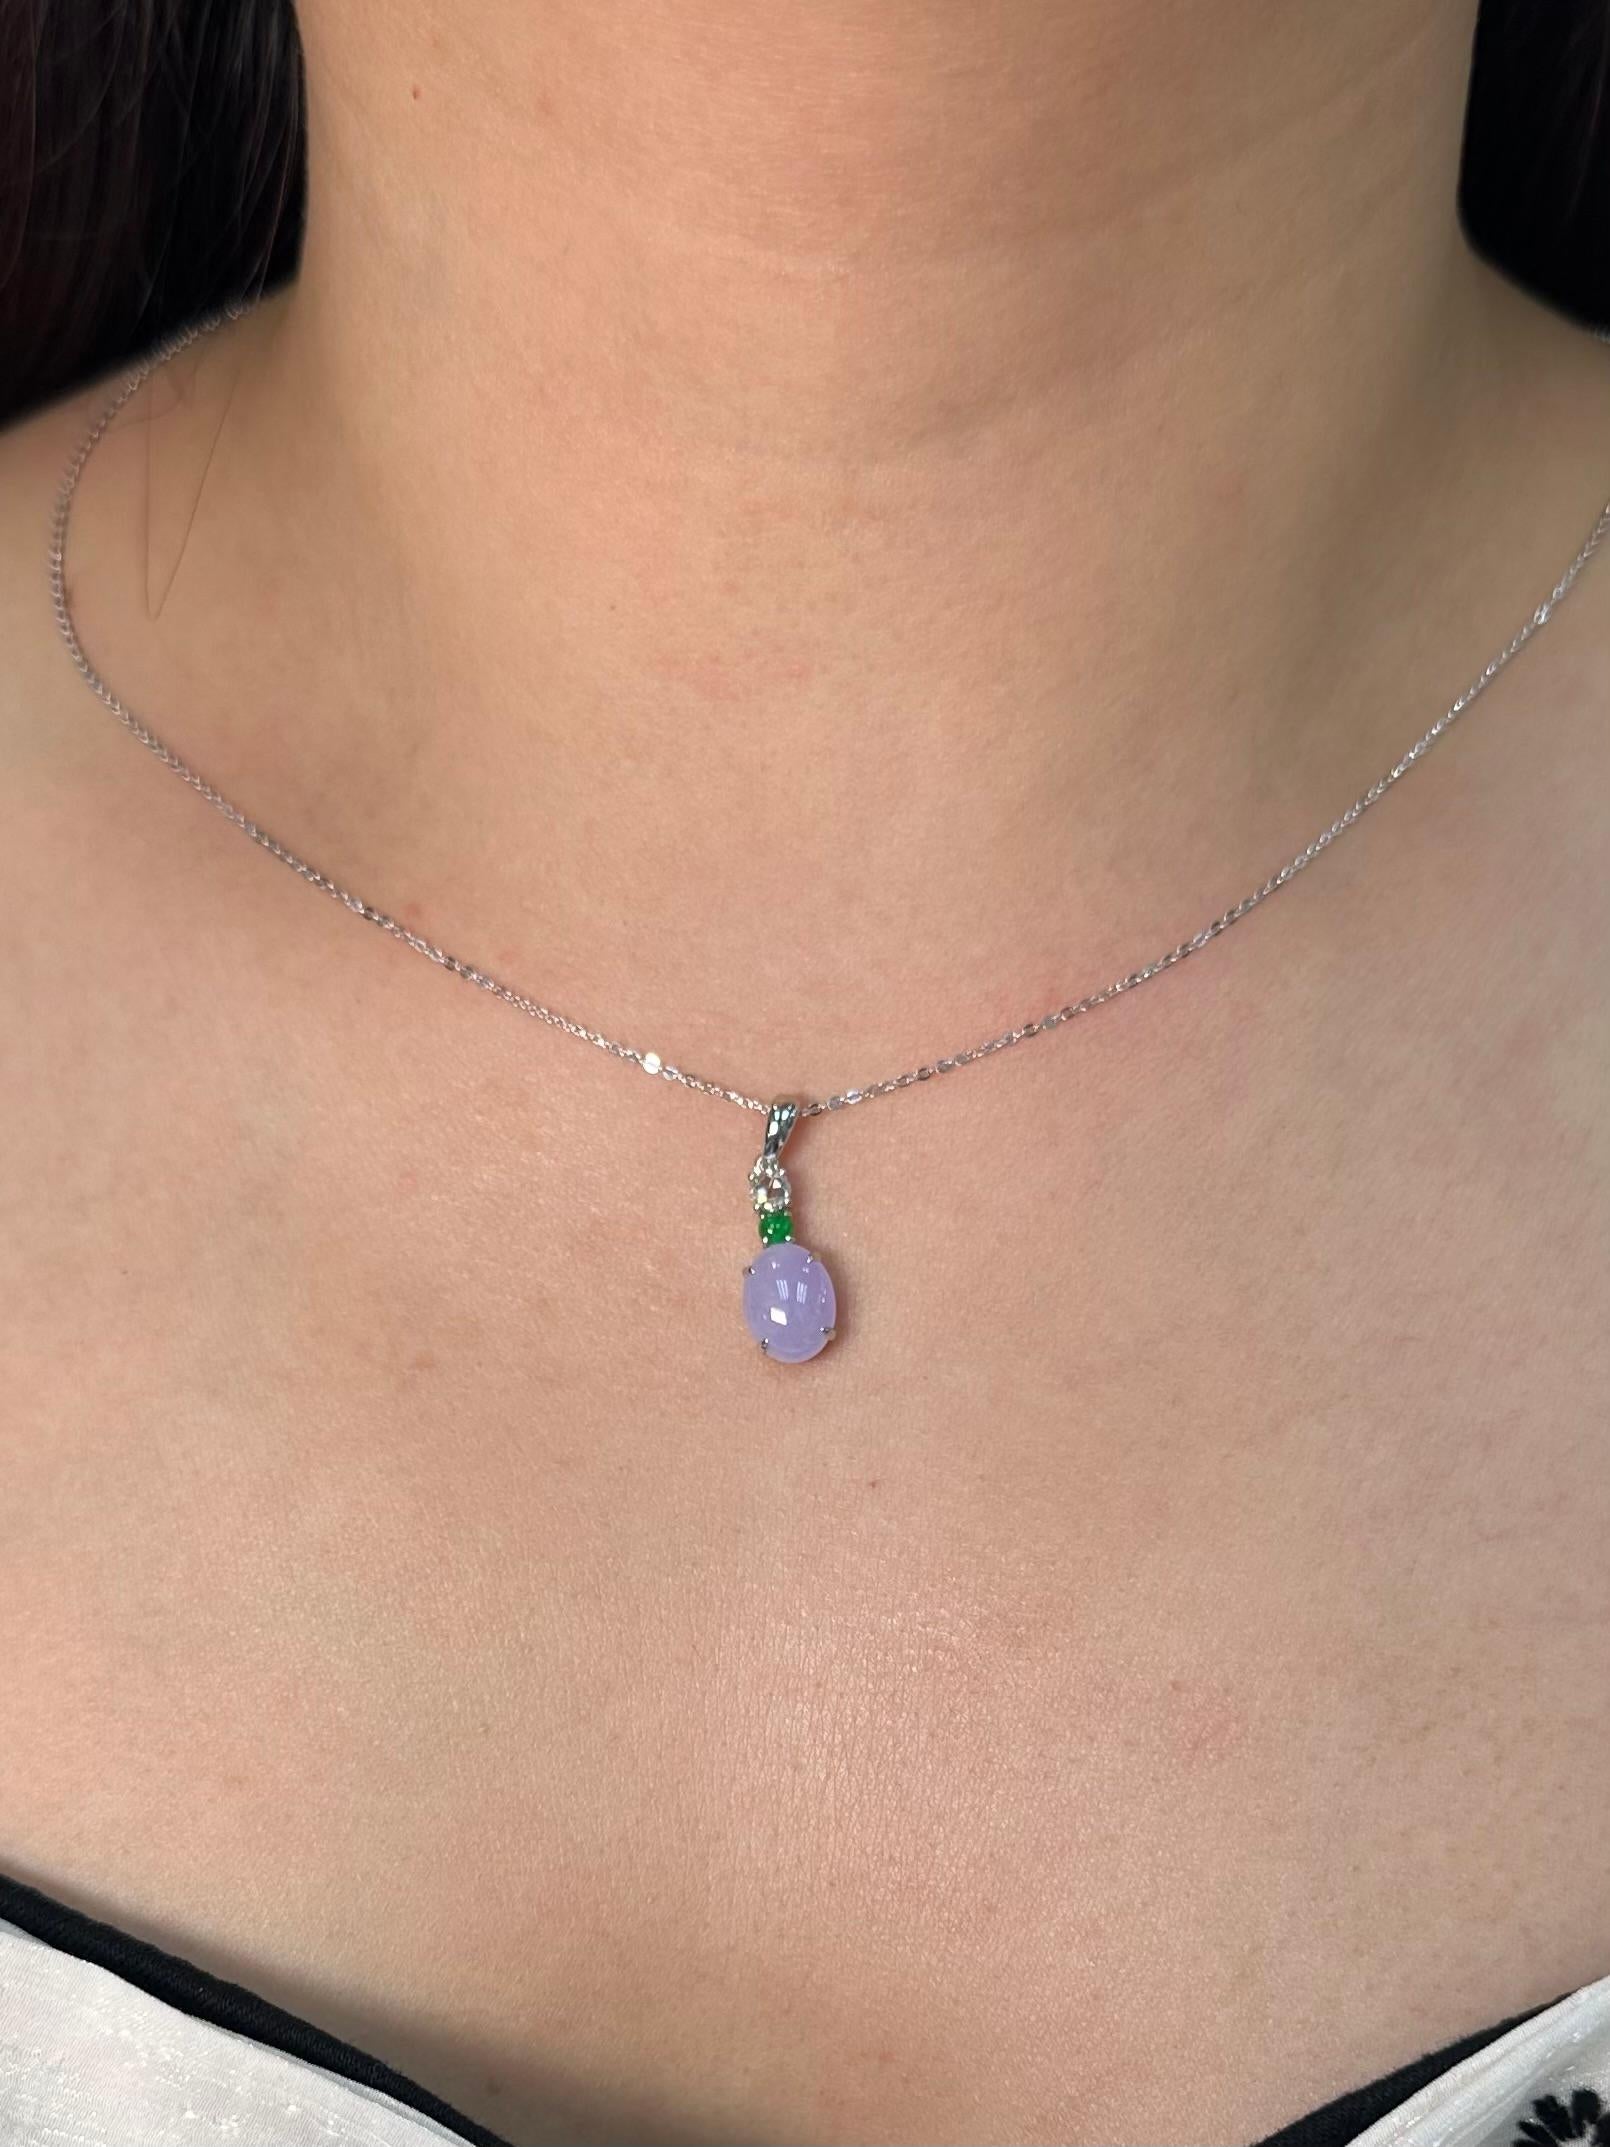 Please check out the HD video! The Jade is certified to be natural. The pendant is set in 18k white gold with one rose cut diamond. The diamond weights 0.18 cts. The untreated / un-enhanced natural lavender jade is translucent. The color is a